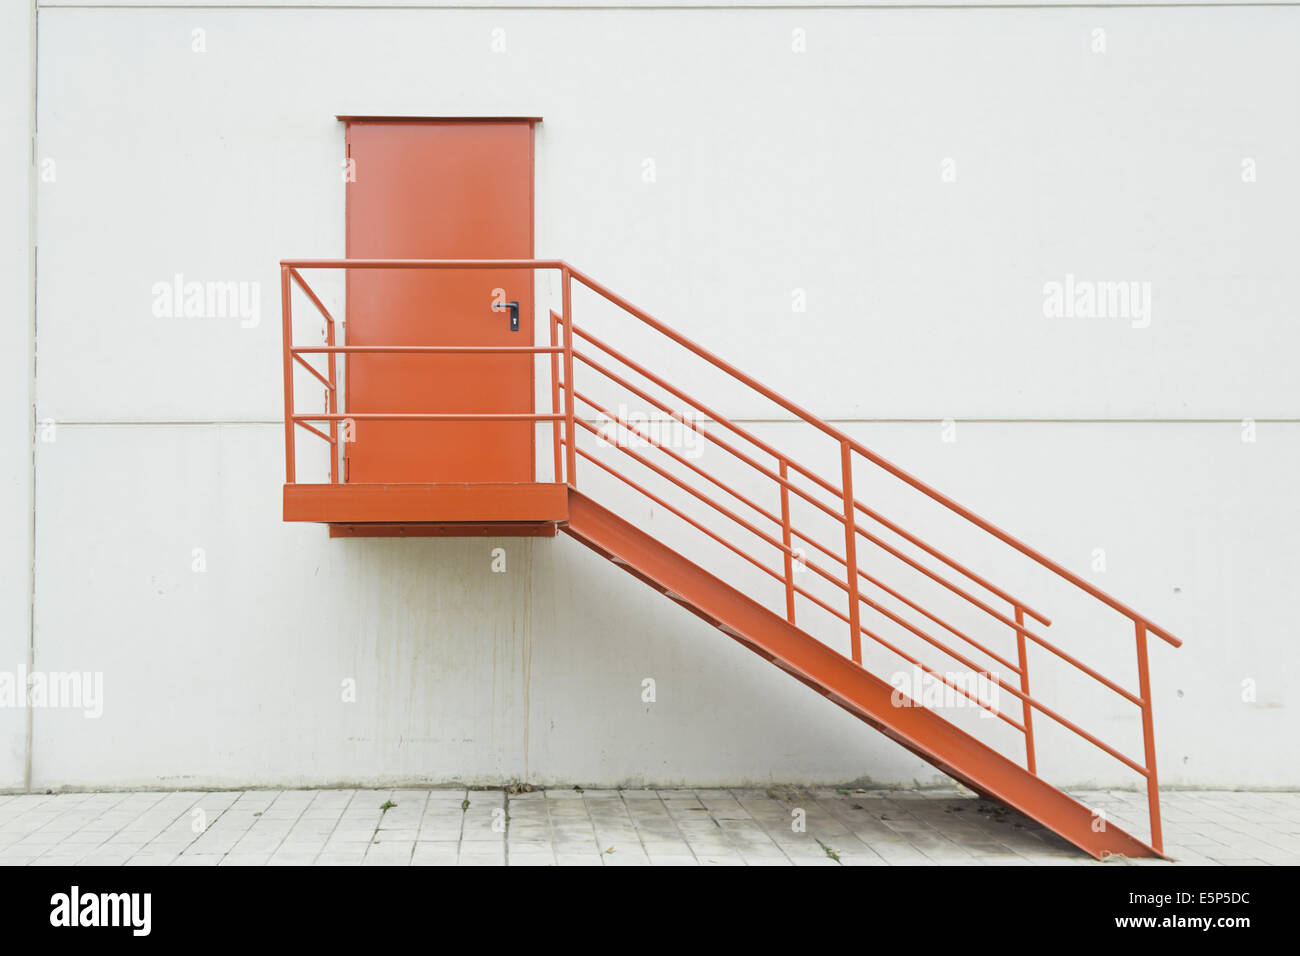 Red door access industrial production, construction Stock Photo